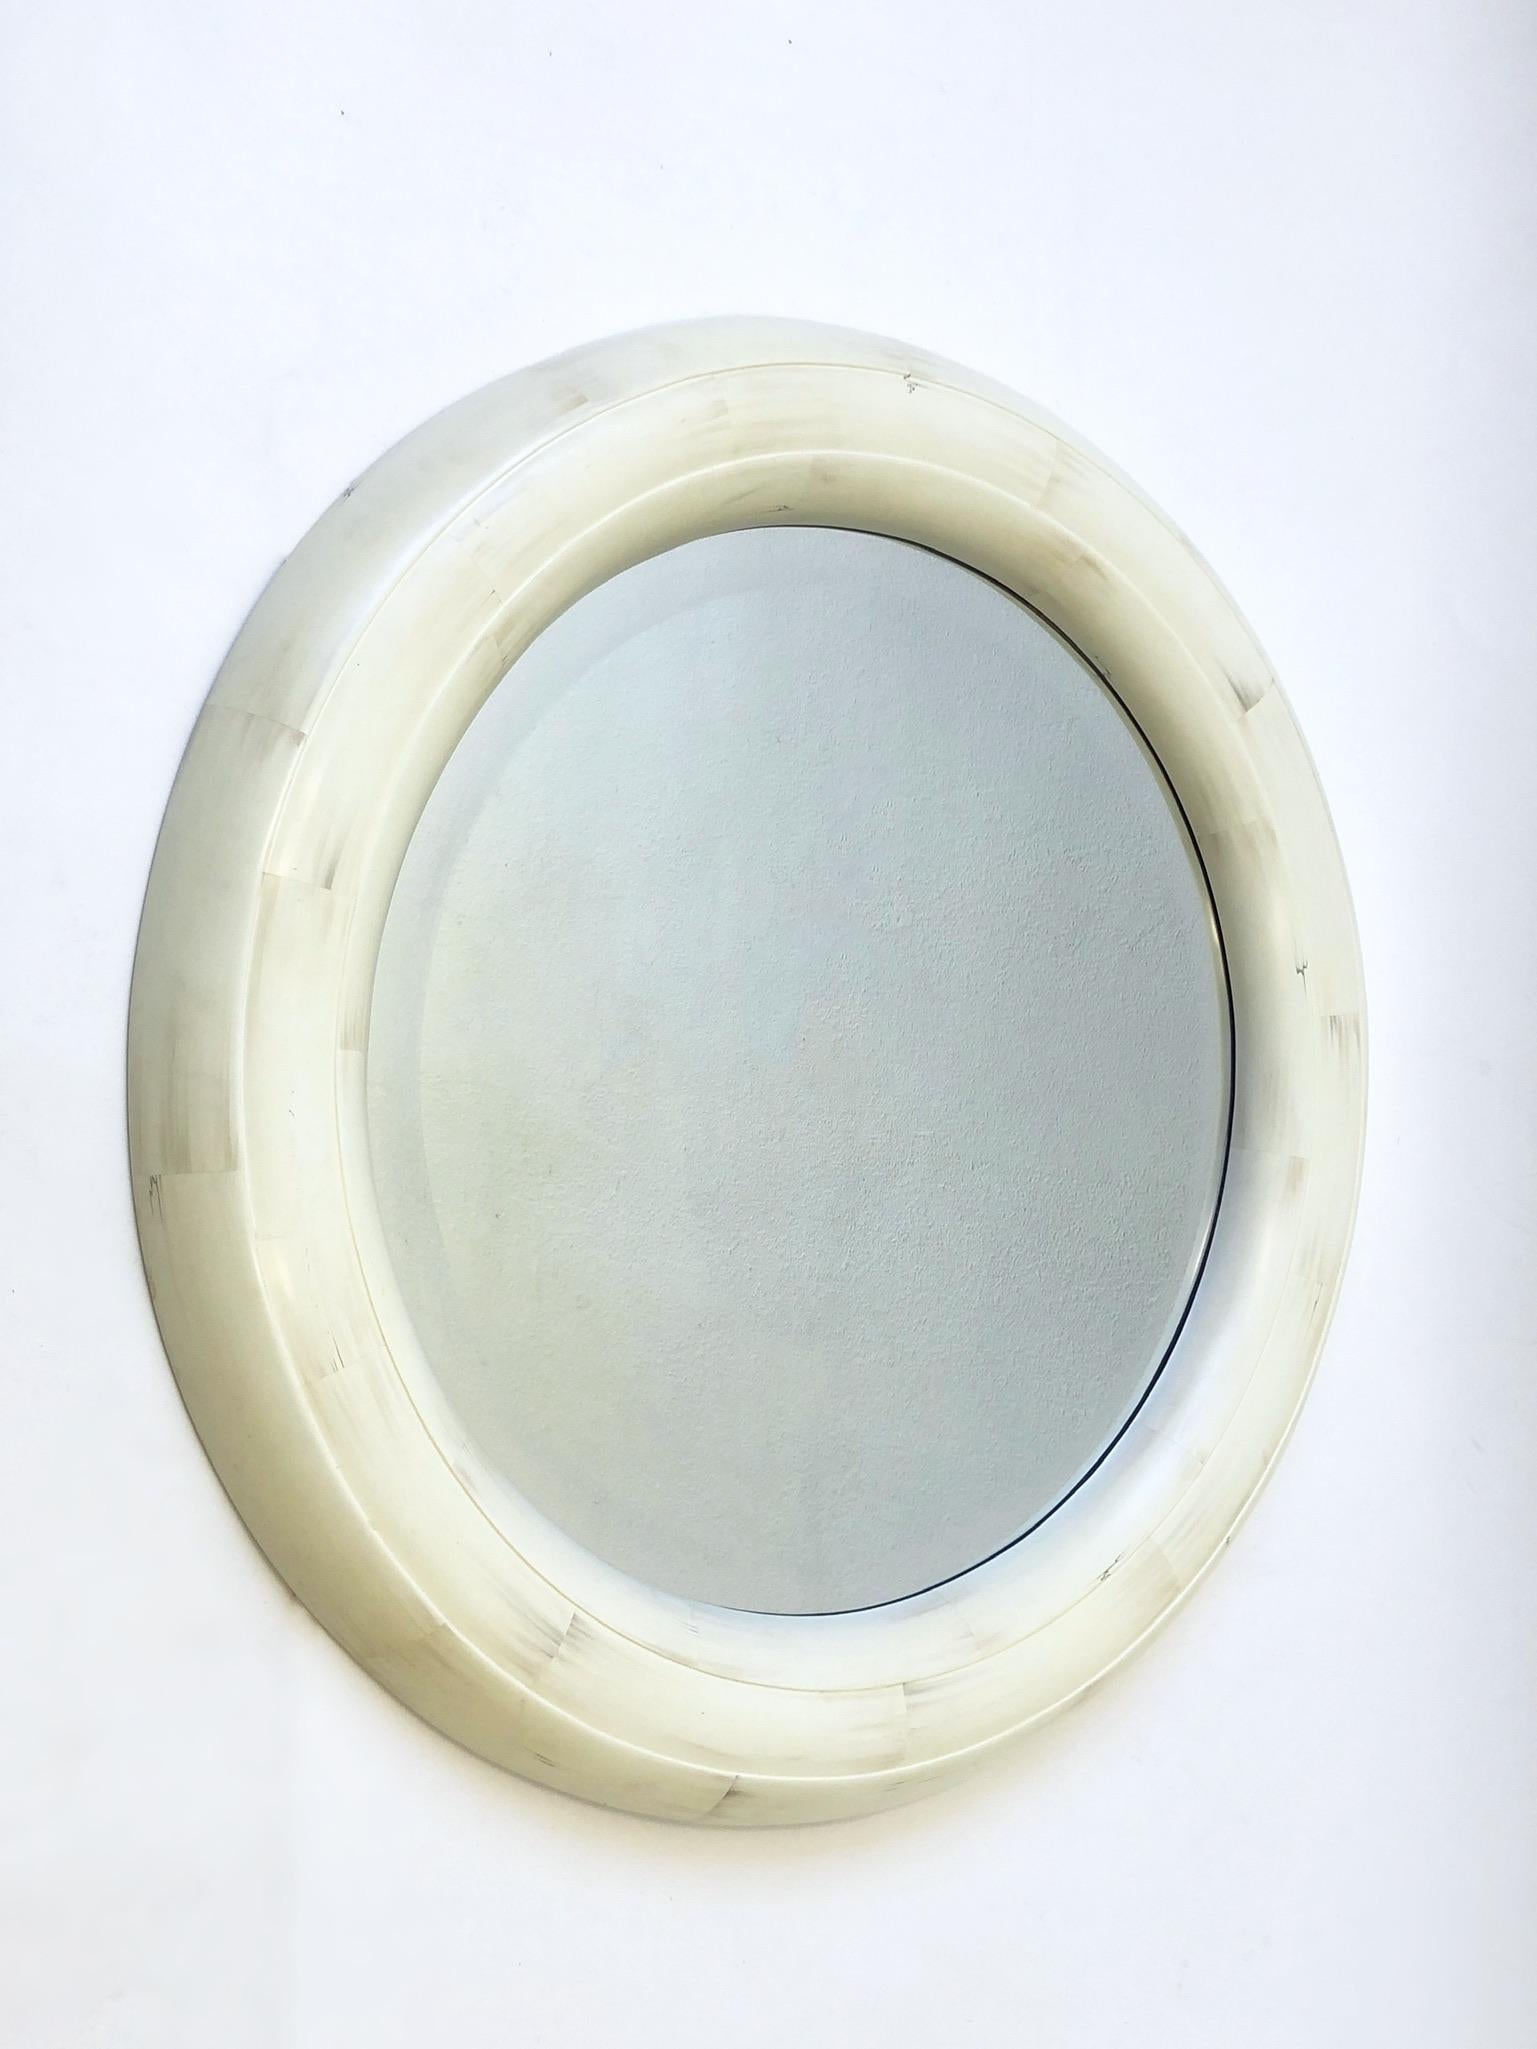 1980’s Bone lacquered round beveled mirror in the manner of Karl Springer.
This came out of a Steve Chase estate, were he used several Karl Springer items. 
Measurements: 41.5” diameter, 2.5” deep.